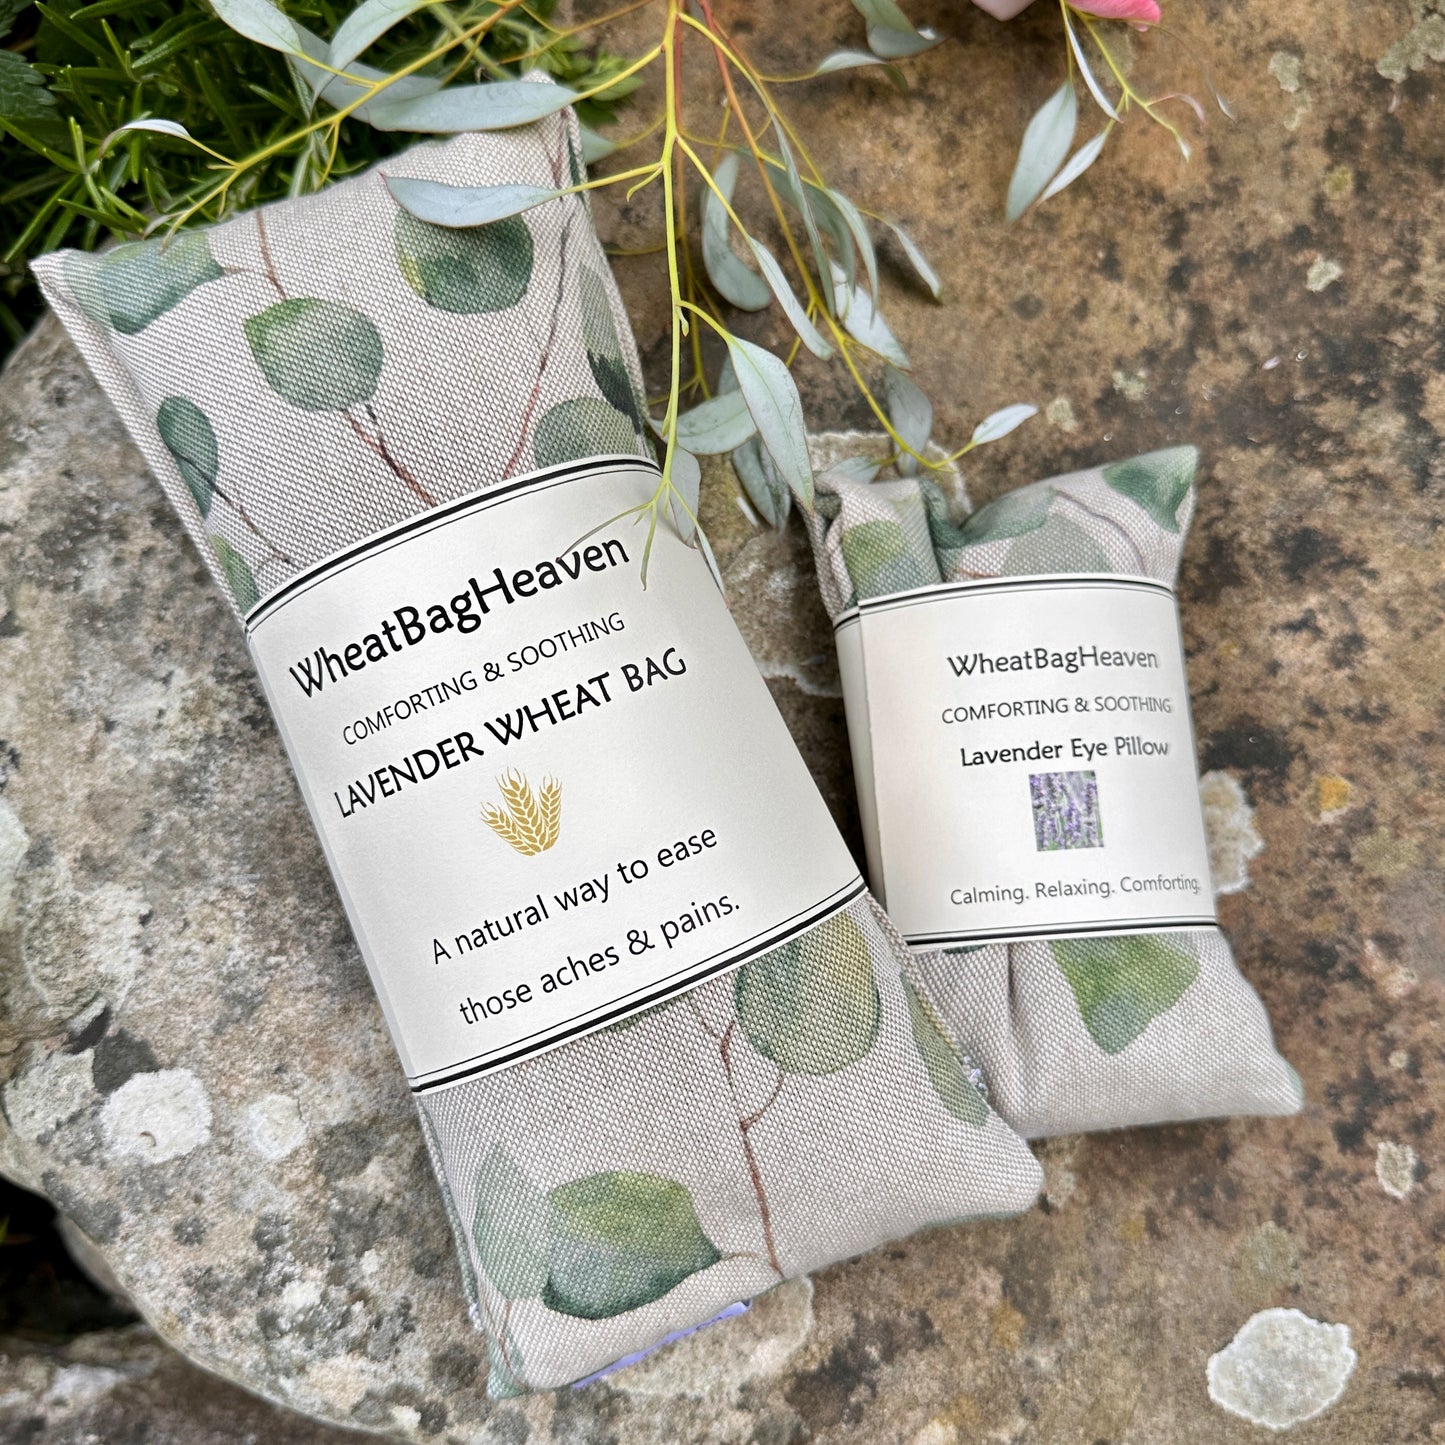 Lovely lavender scented wheat bag heat wrap next to a flax seed filled  eye pillow  in the same botanical print, eucalyptus leaves on a beige background. Pictured in the garden of wheat bag heaven